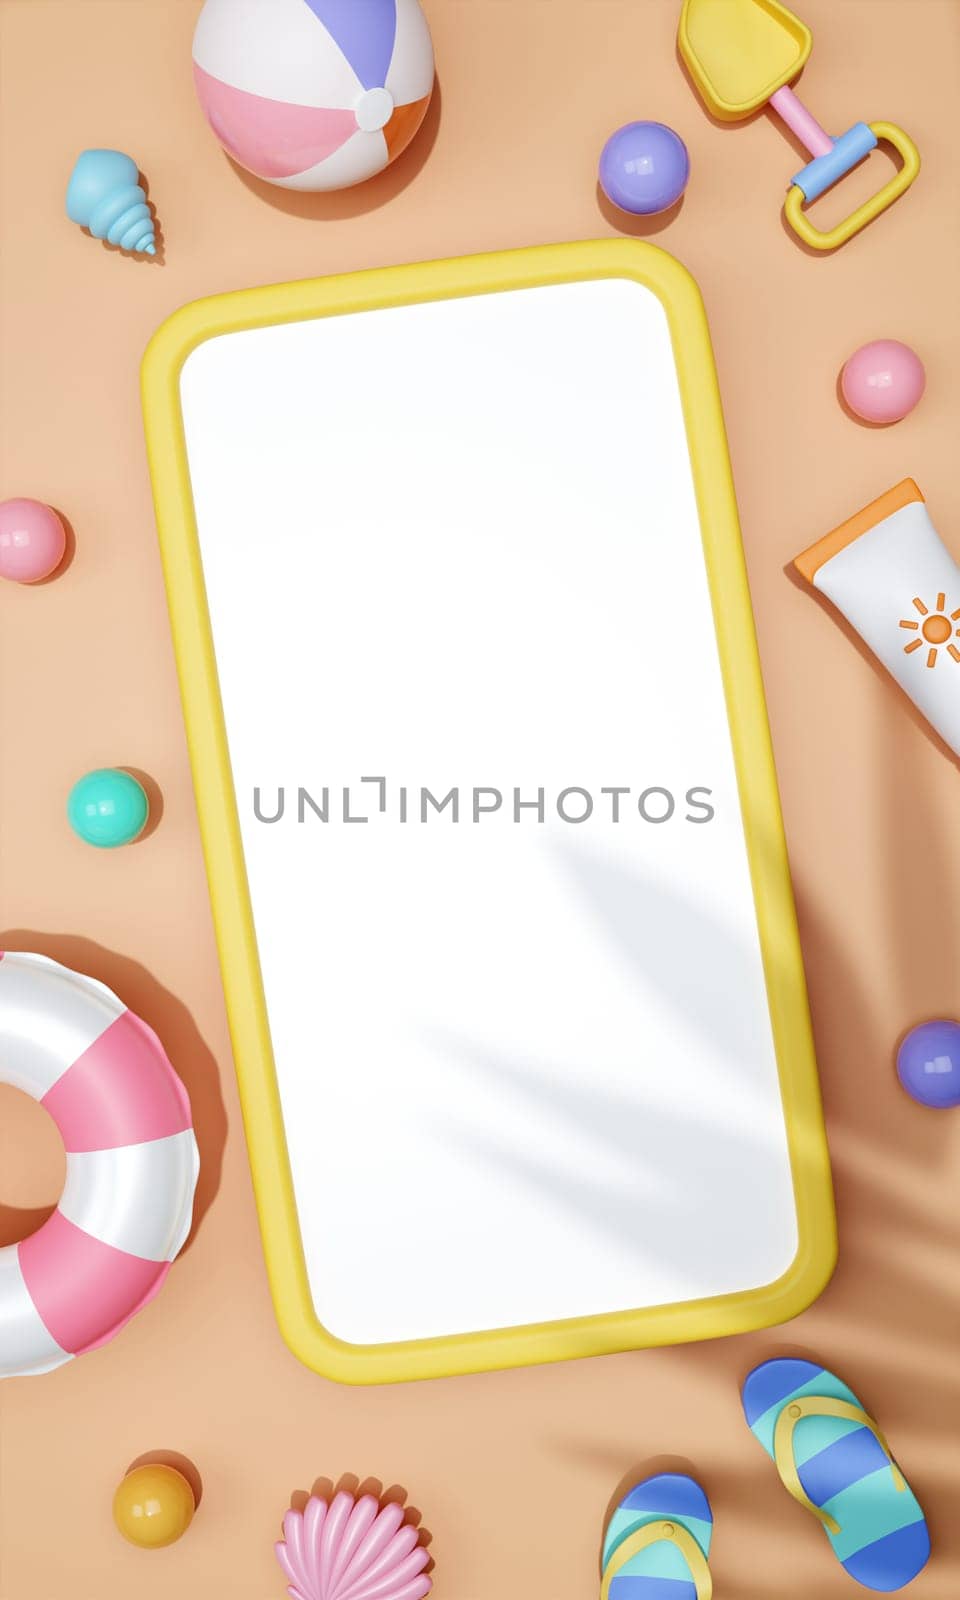 A mobile phone mockup with beach accessories. mobile application shop summer minimal promotion sale. 3d render illustration by meepiangraphic